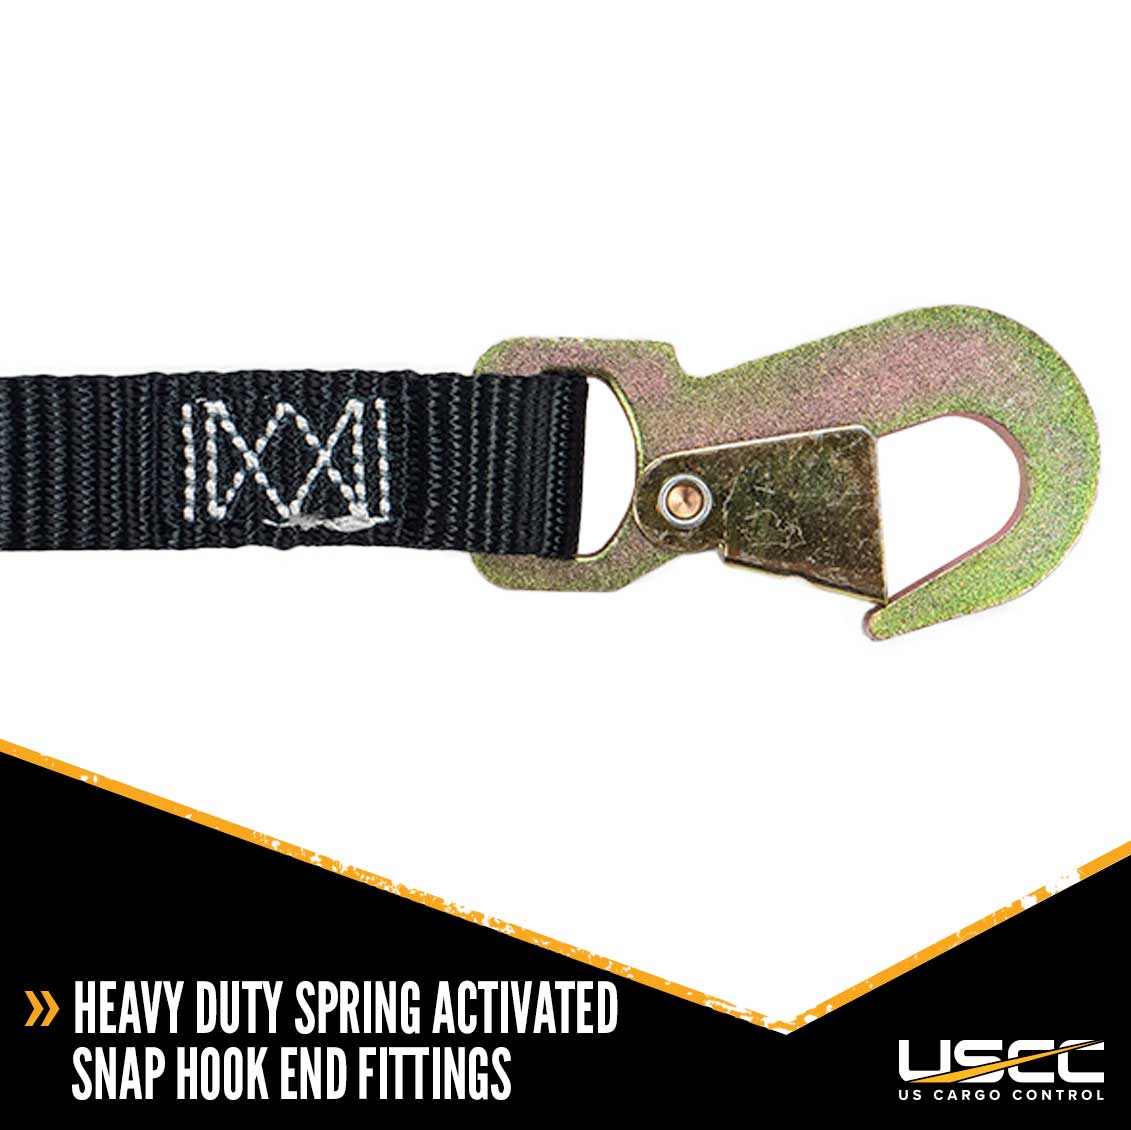 1 inch x 6 foot Ratchet Strap w Flat Snap Hooks image 5 of 8